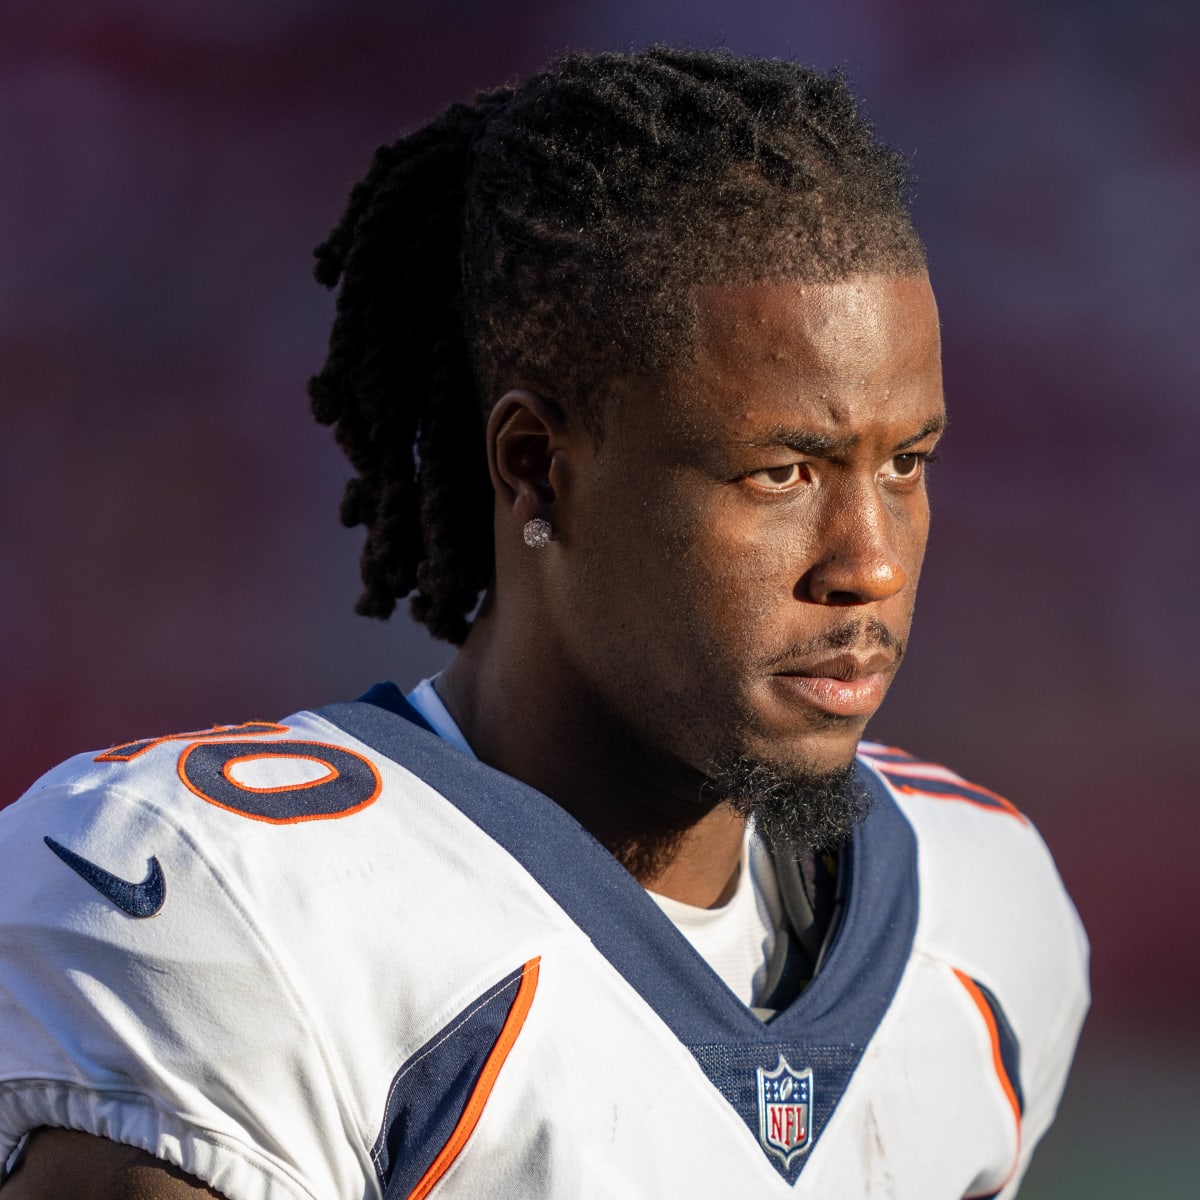 NFL rumors: Broncos could trade wide receiver